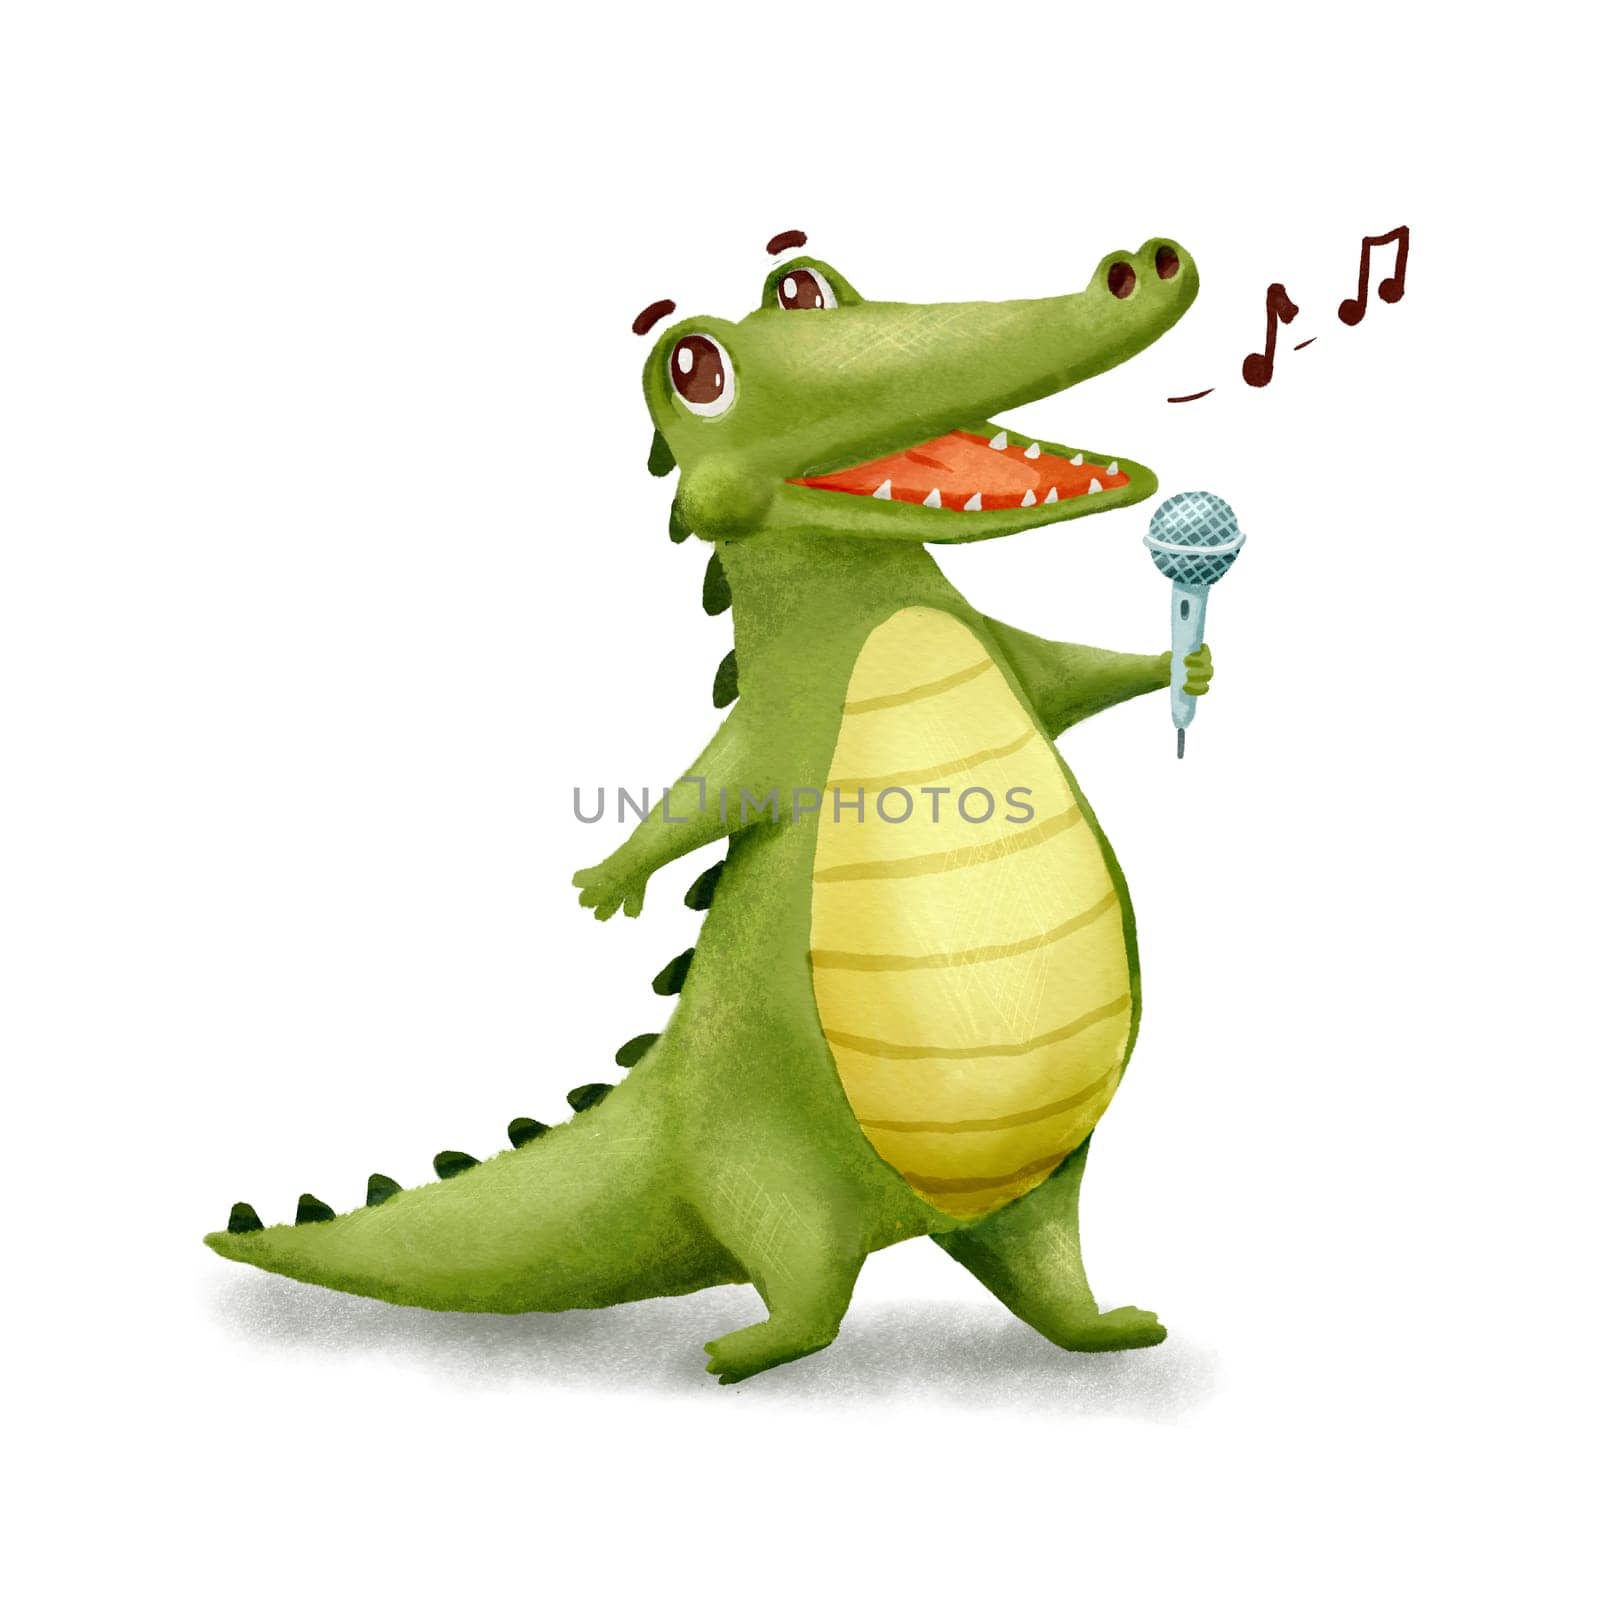 Cute Crocodile is singer. Funny Alligator with microphone isolated on white. Cartoon Illustration Animal Character singing song